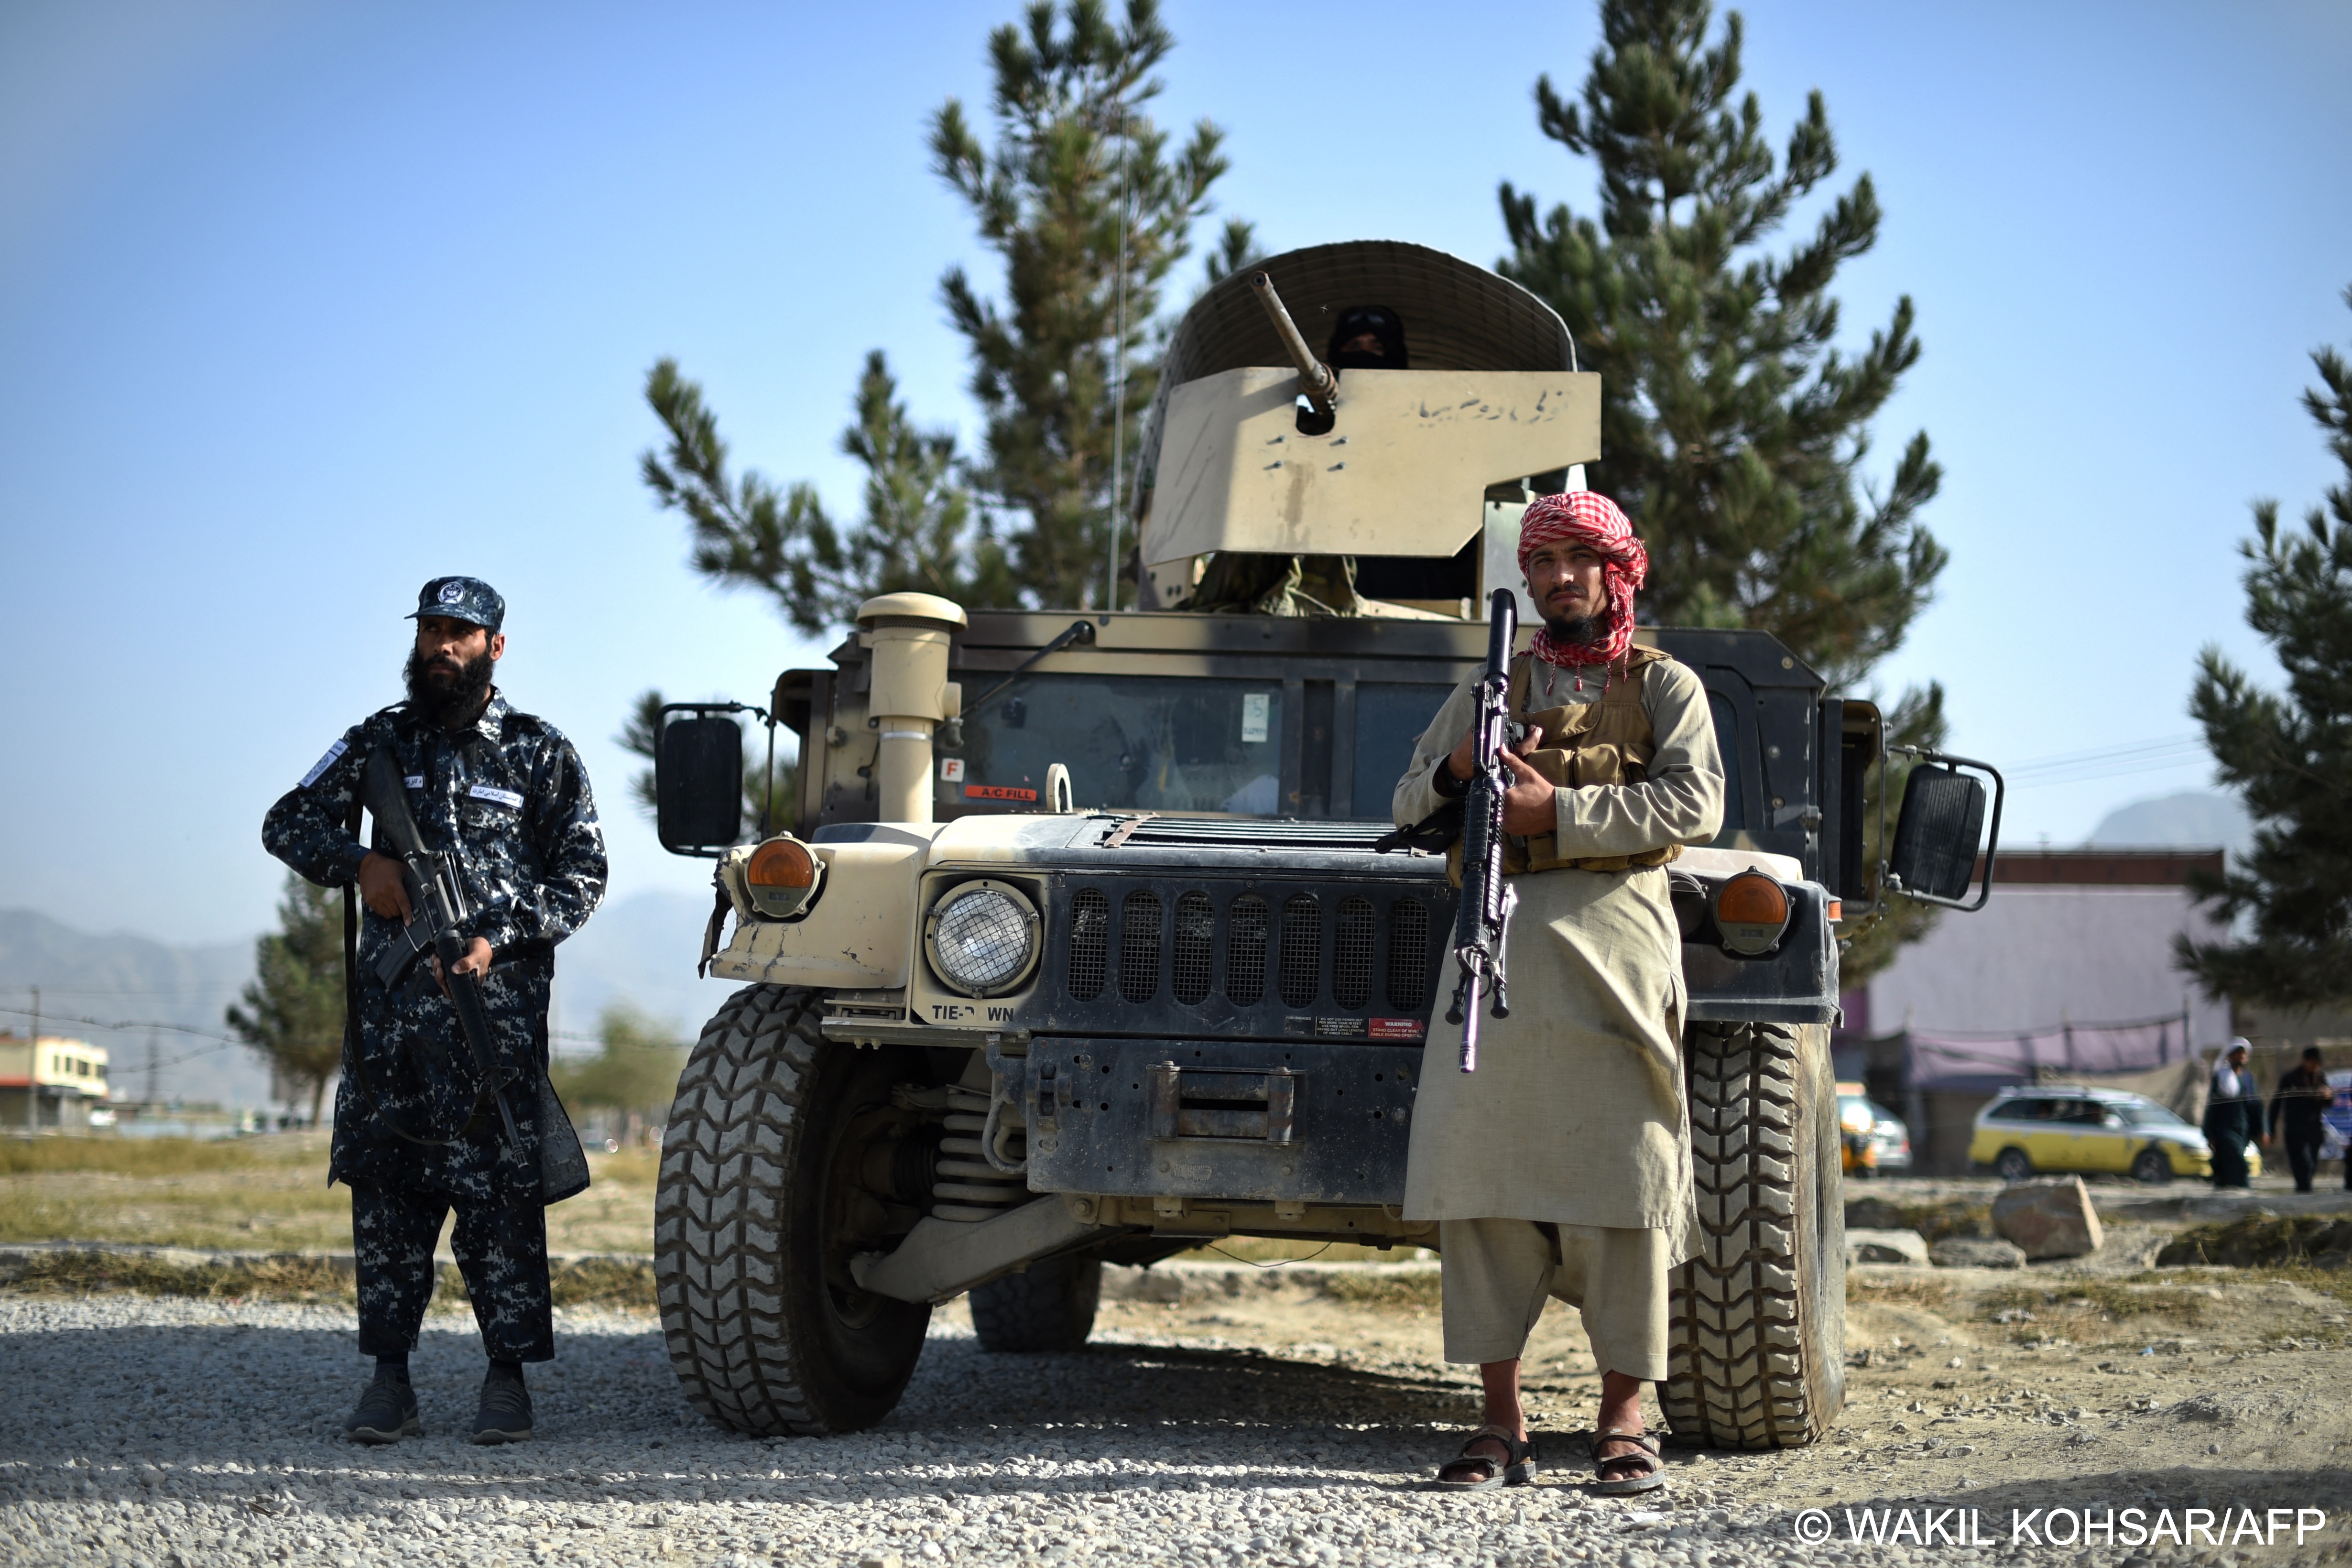 Taliban fighters pose with an armoured vehicle and munitions (photo: Wakil Kohsar/AFP) 